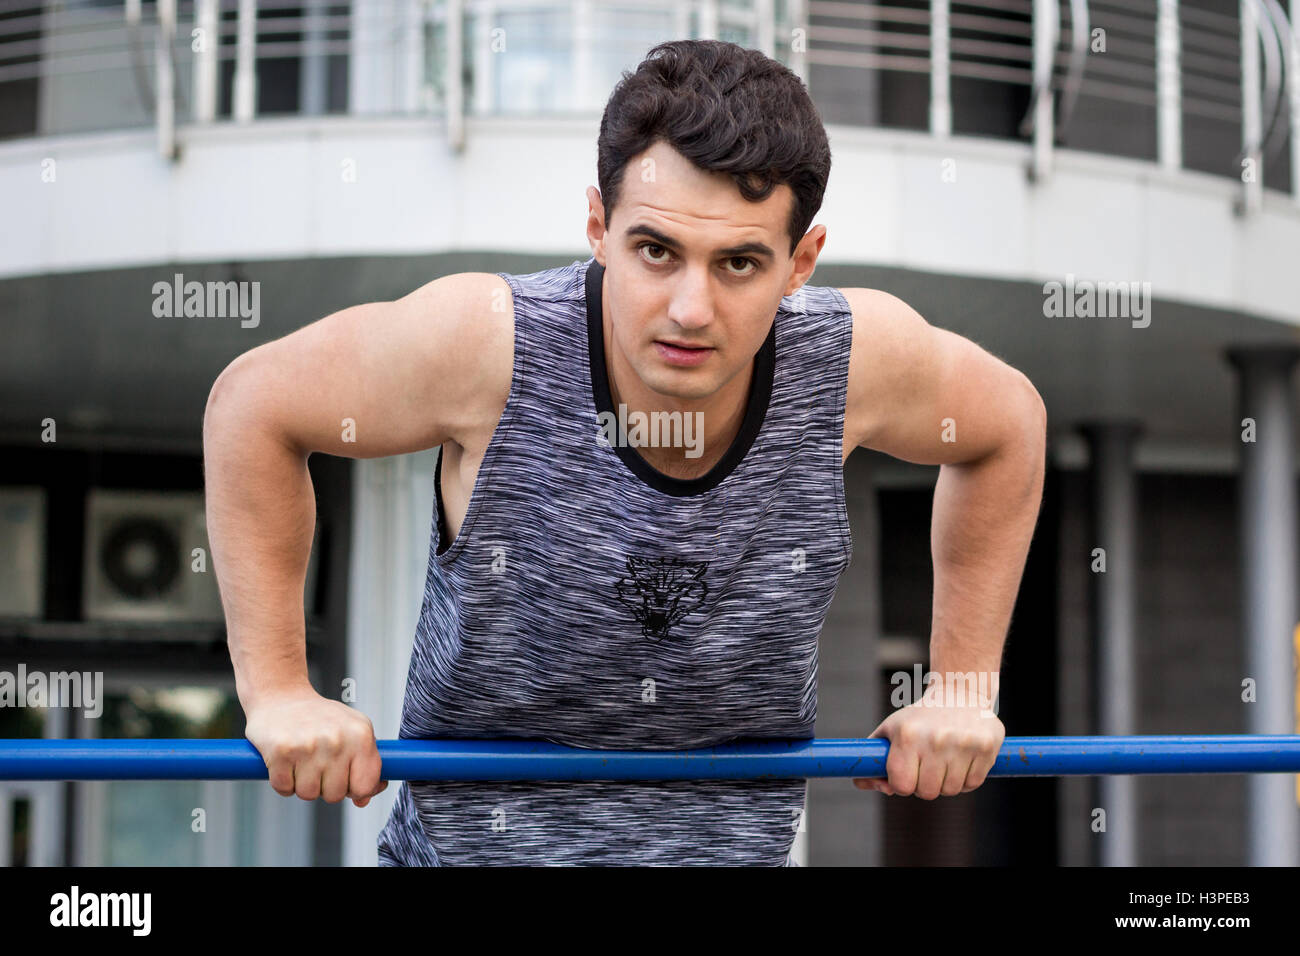 Young fitness man lifts up on horizontal bar during training workout outdoor Stock Photo